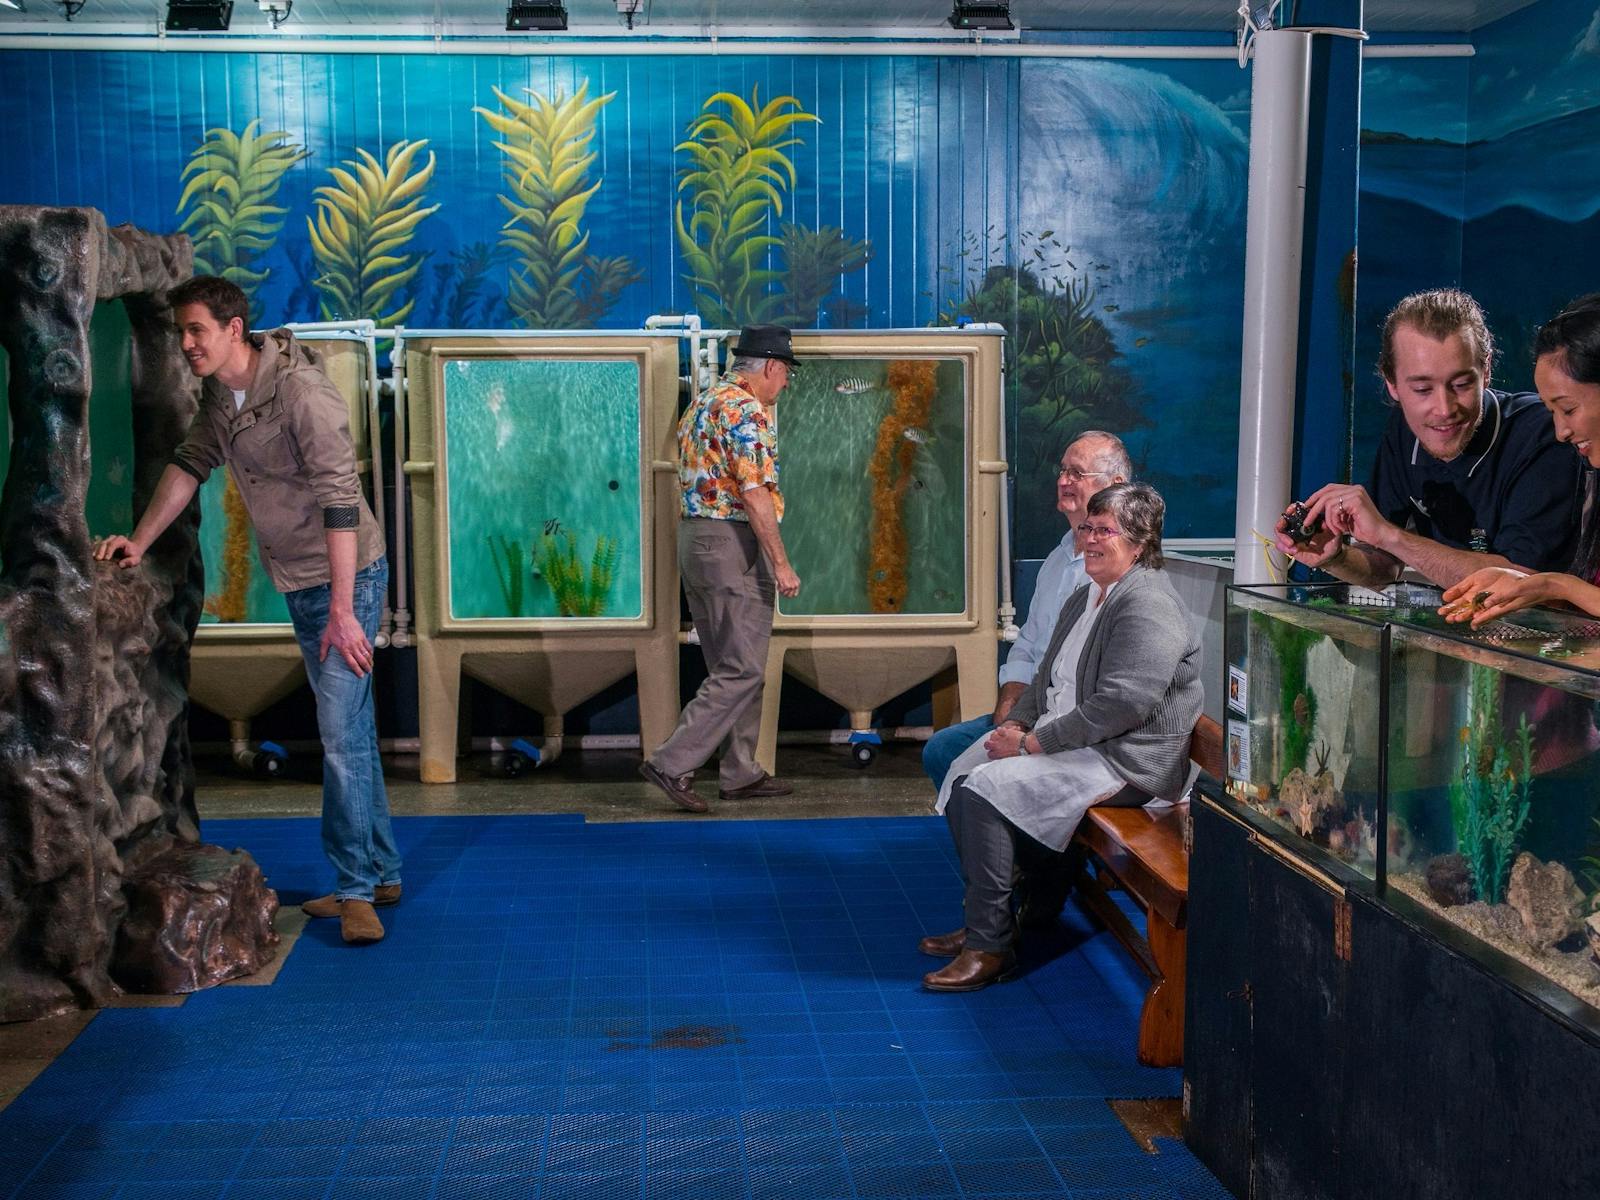 Guests enjoying the range of fish in the main room of the Southern Ocean Aquarium